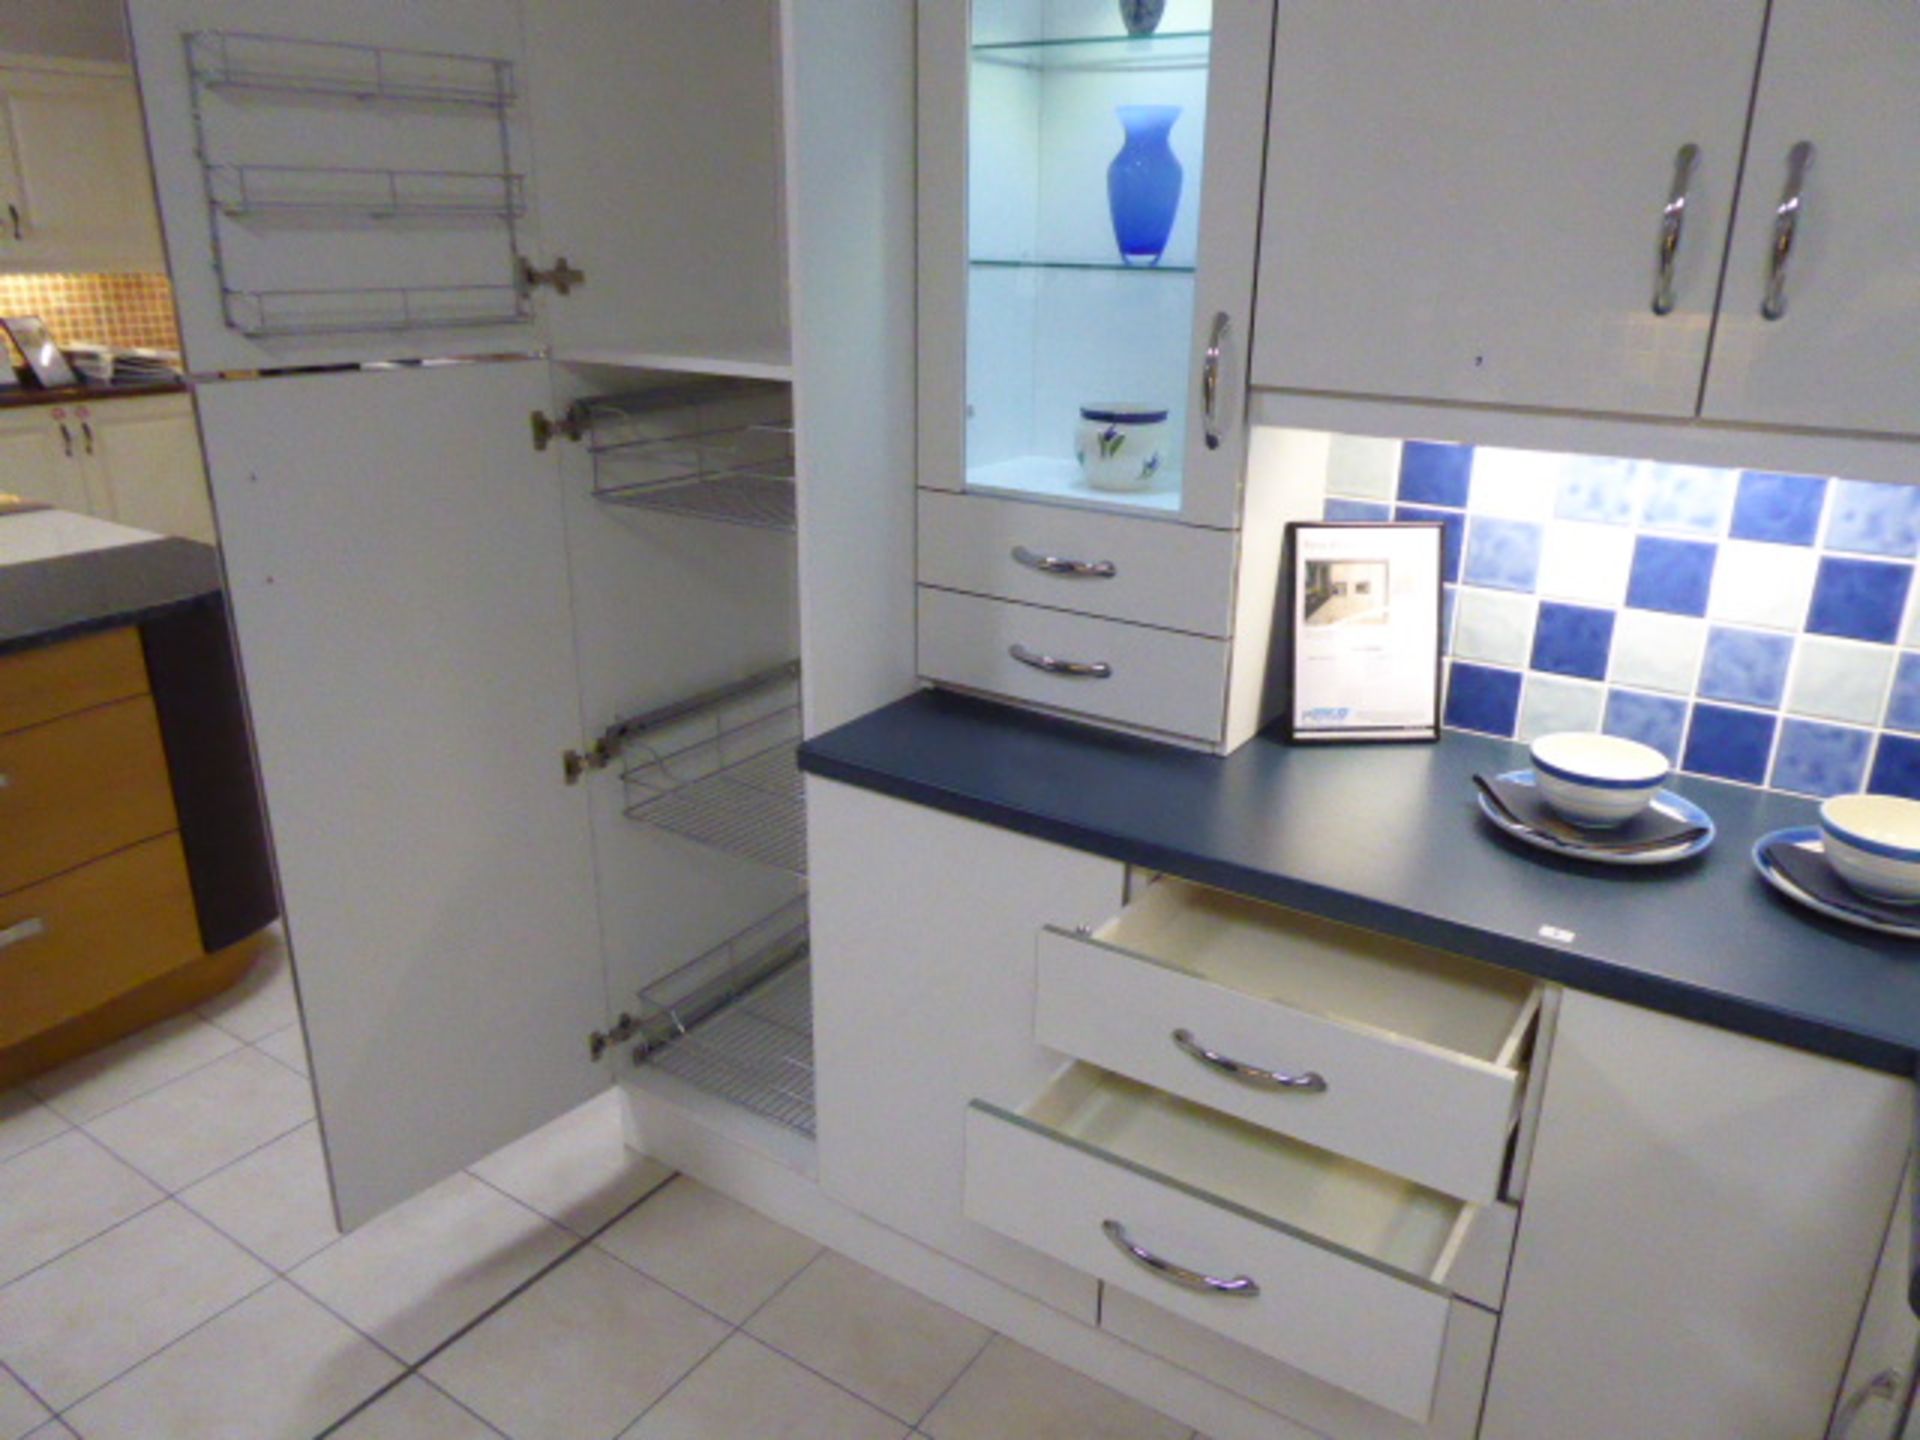 Roma White kitchen in L-shape with a blue granite effect worktop. Max dimensions 240cm by 130cm - Image 4 of 4